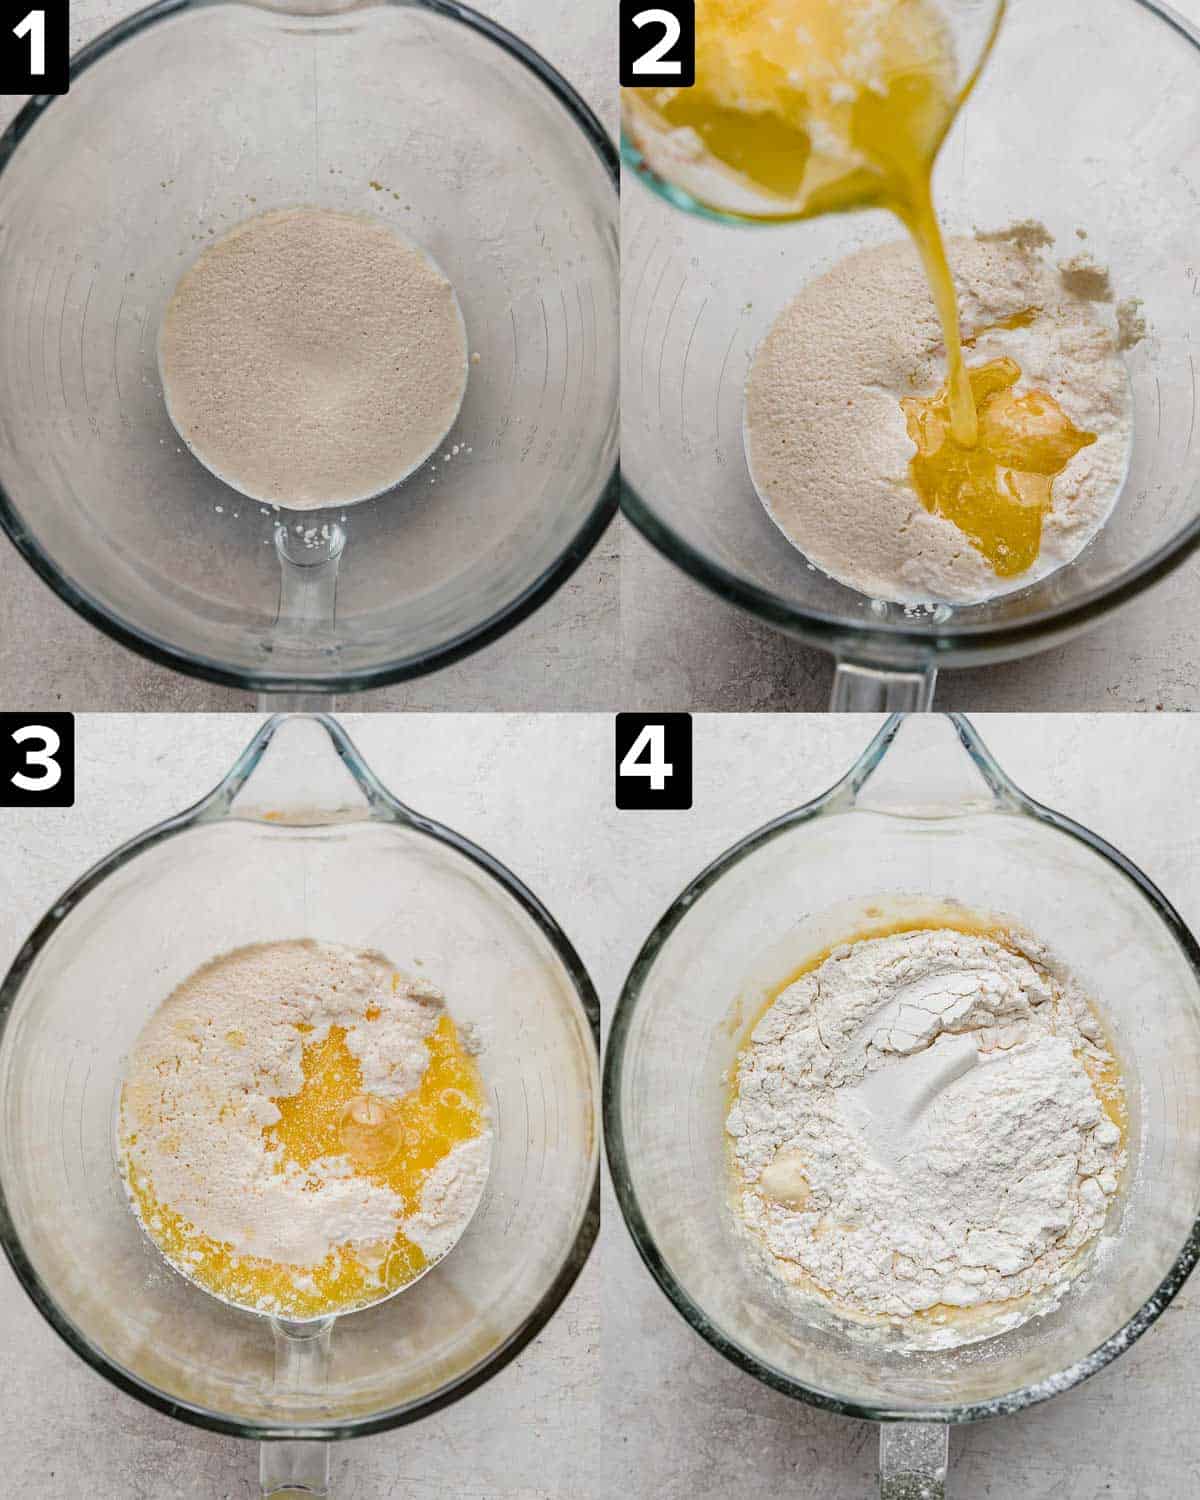 Four images showing how to make Belgian Liege Waffle dough using yeast, milk, melted butter, and flour.